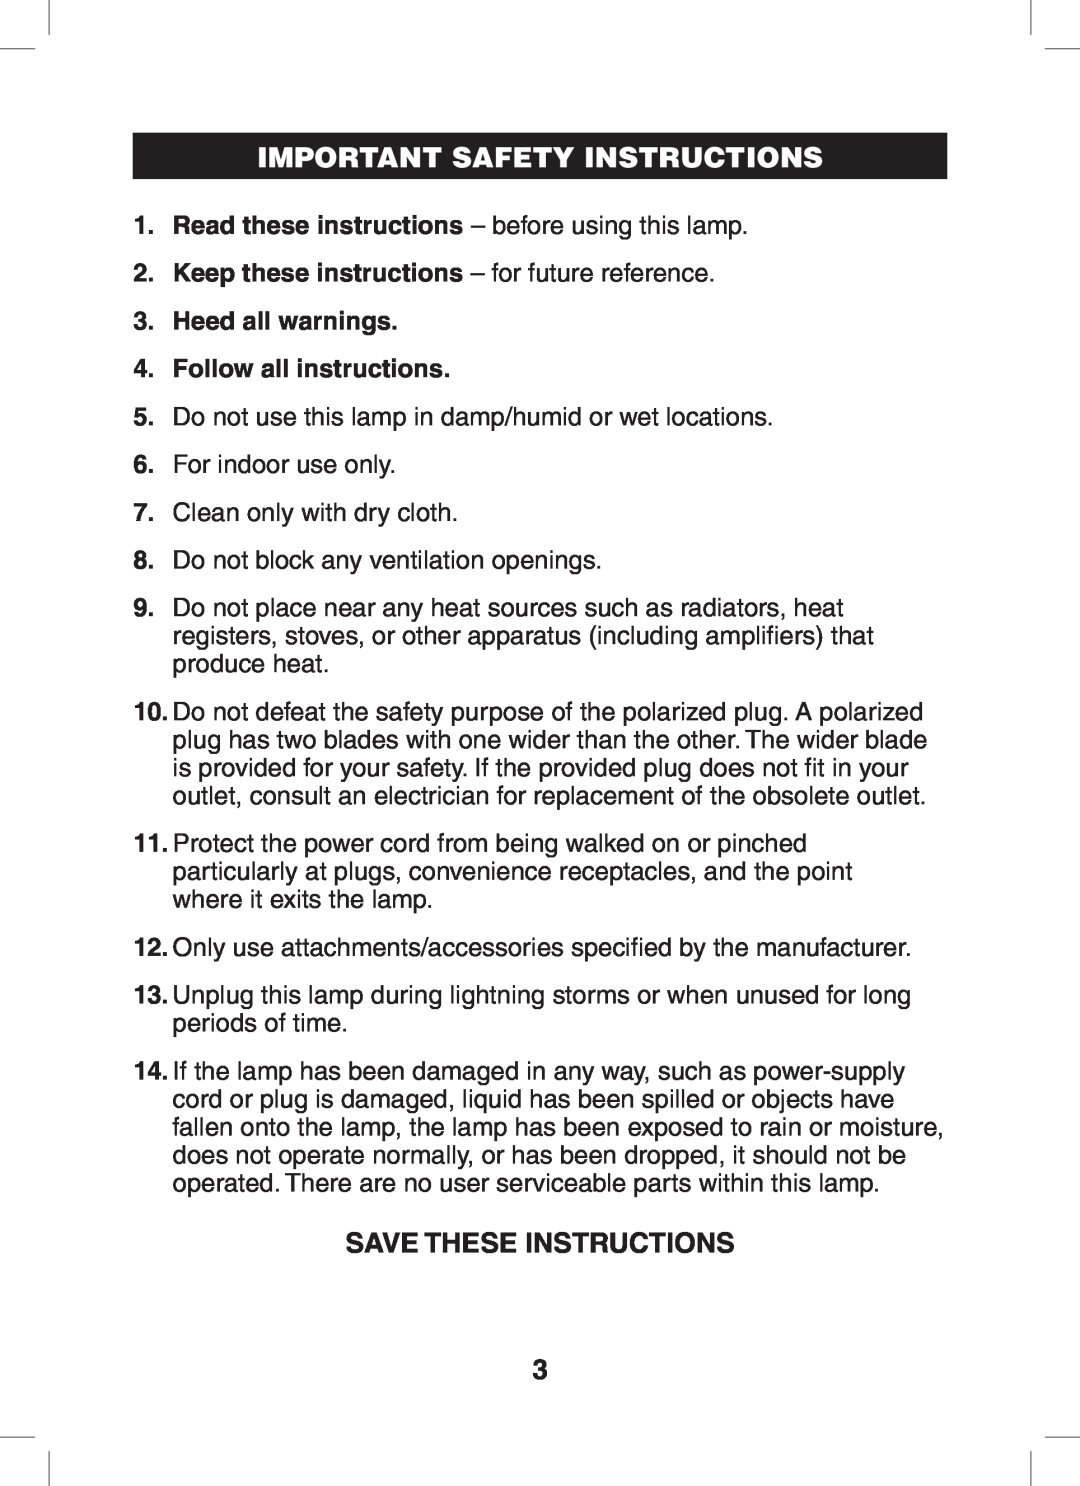 Verilux VT01 manual Save These Instructions, Important Safety Instructions, Keep these instructions - for future reference 